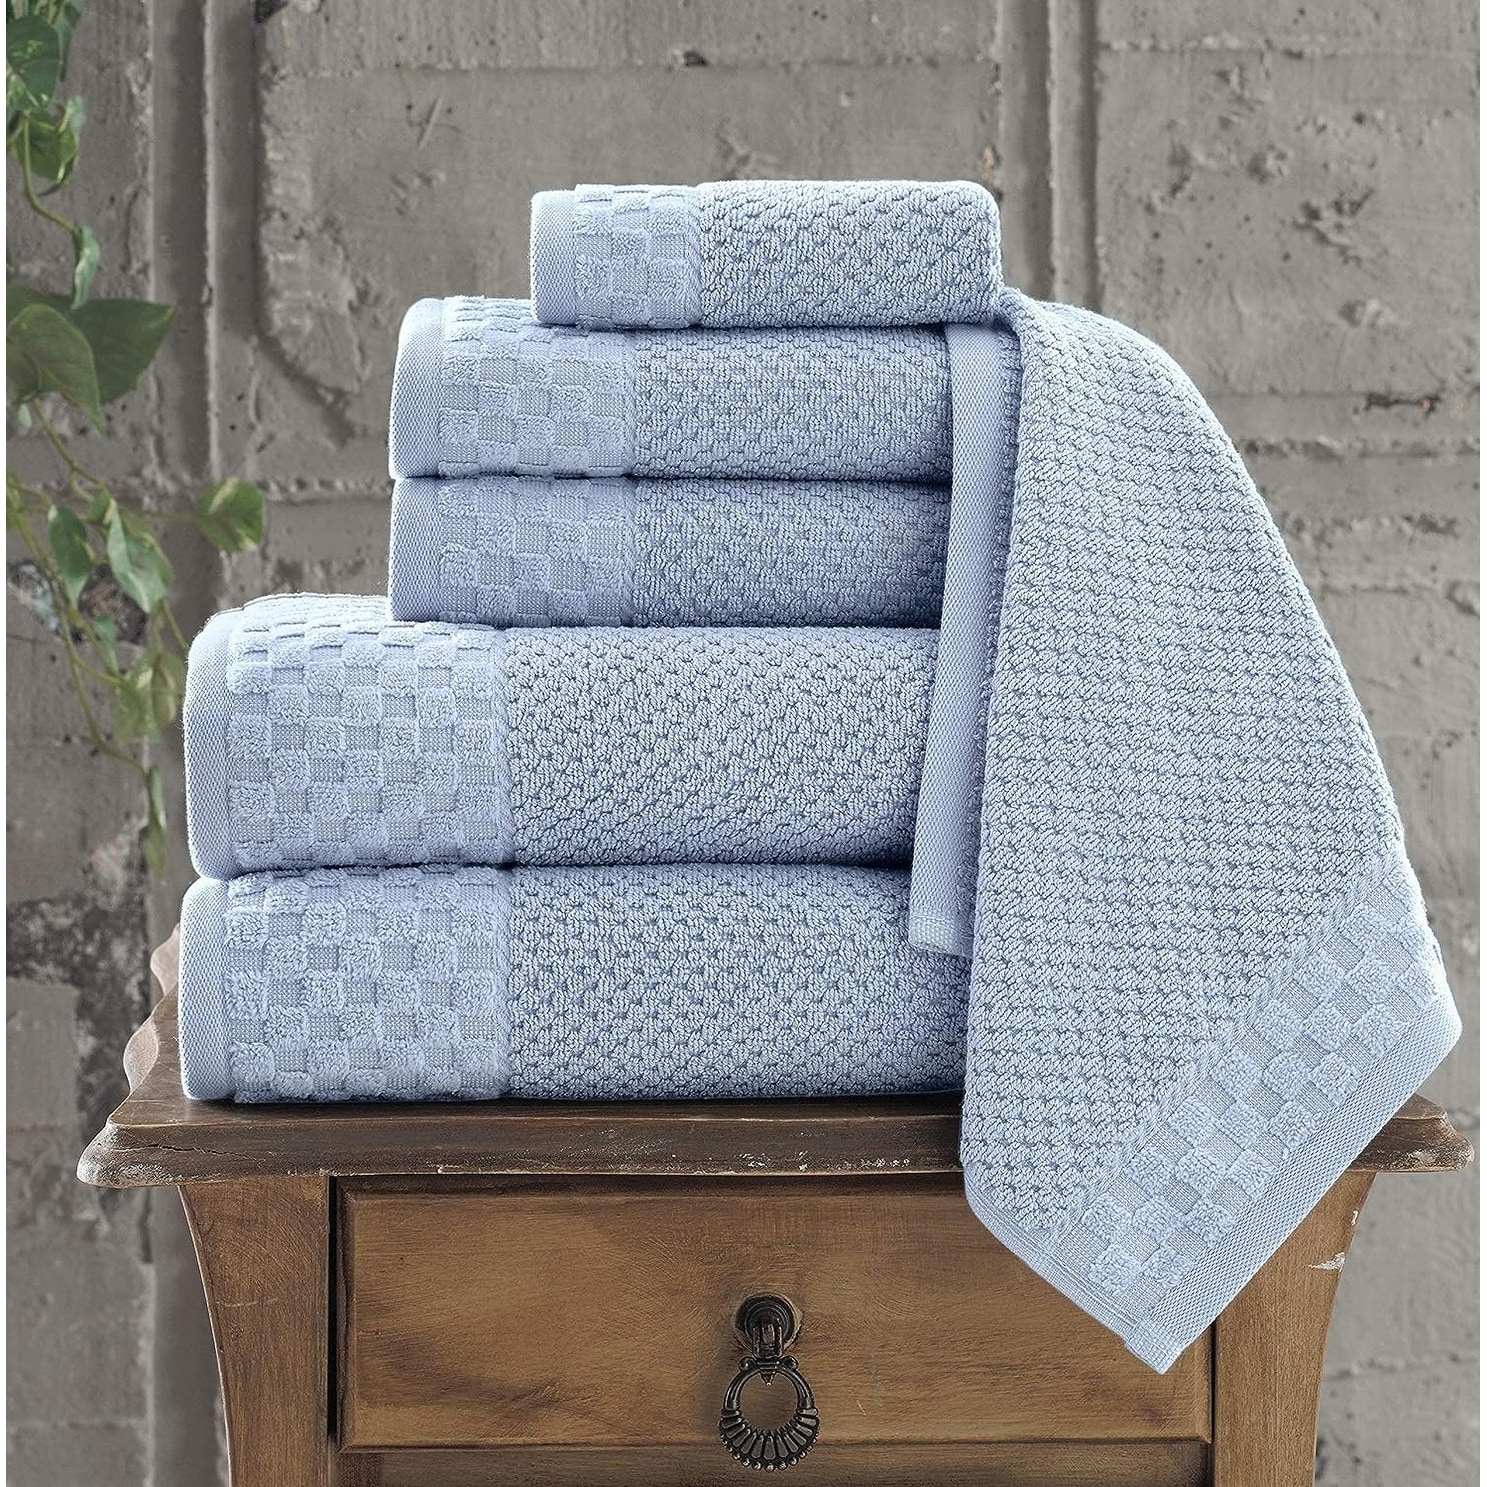 https://ak1.ostkcdn.com/images/products/is/images/direct/1c59a3240b0d324078bbf3b46241d60ce5cdfb7f/Boston-Towel-Collection-Turkish-Cotton-Luxury-and-Soft-2-Large-Bath-Towels%2C-2-Washcloths-and-2-Hand-Towels-%28Set-of-6%29.jpg